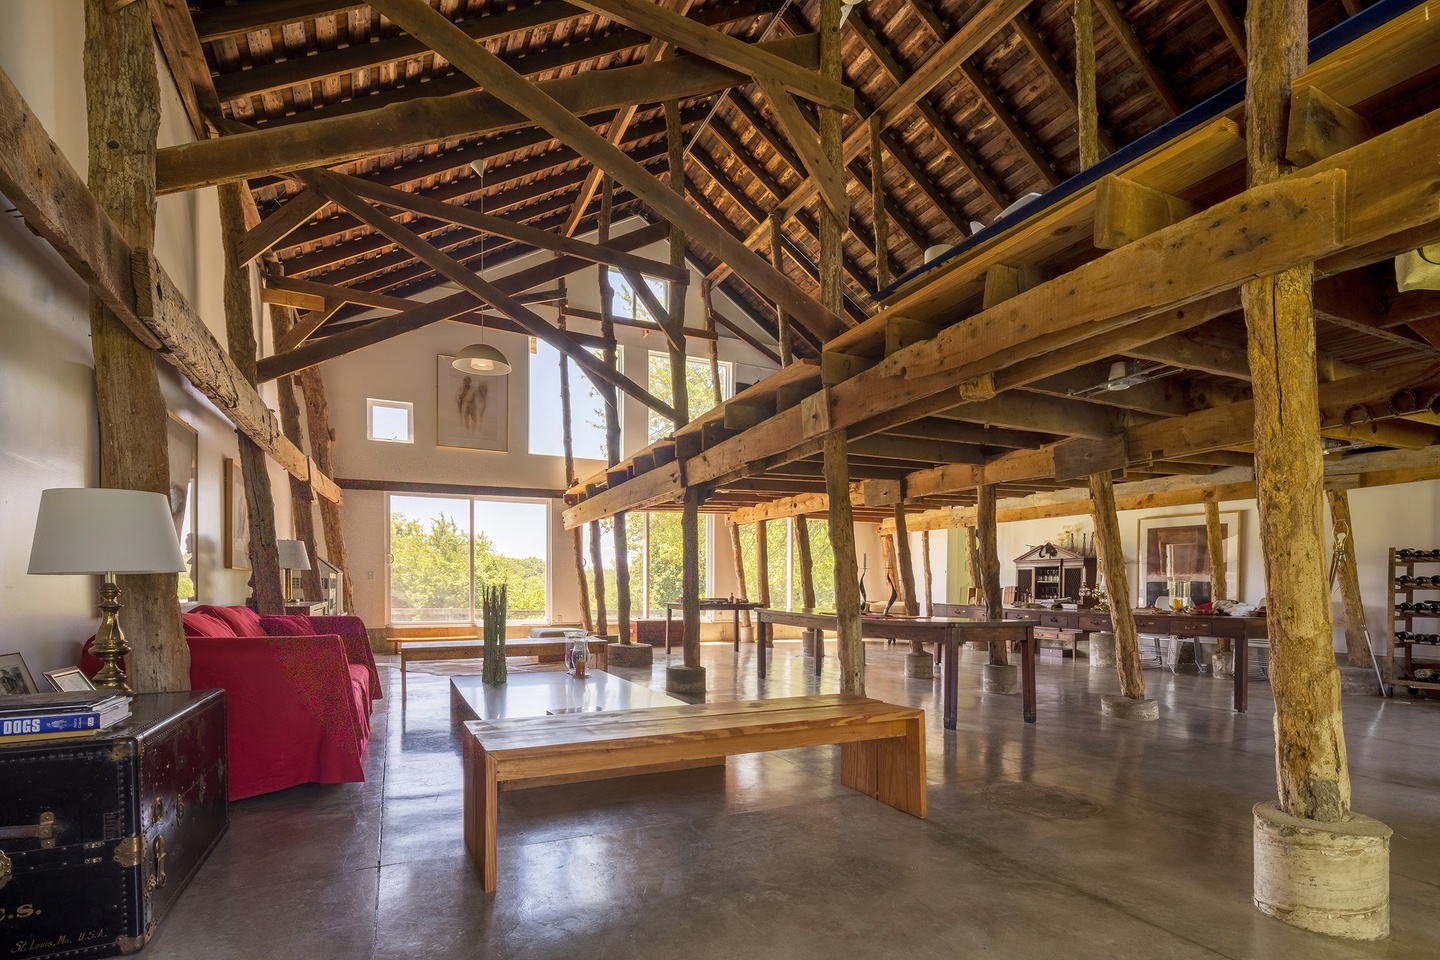 Interior of a barn with rough, exposed wooden beams with a loft and a gabled roof. The floor is shiny concrete and large windows have been added to the back wall.